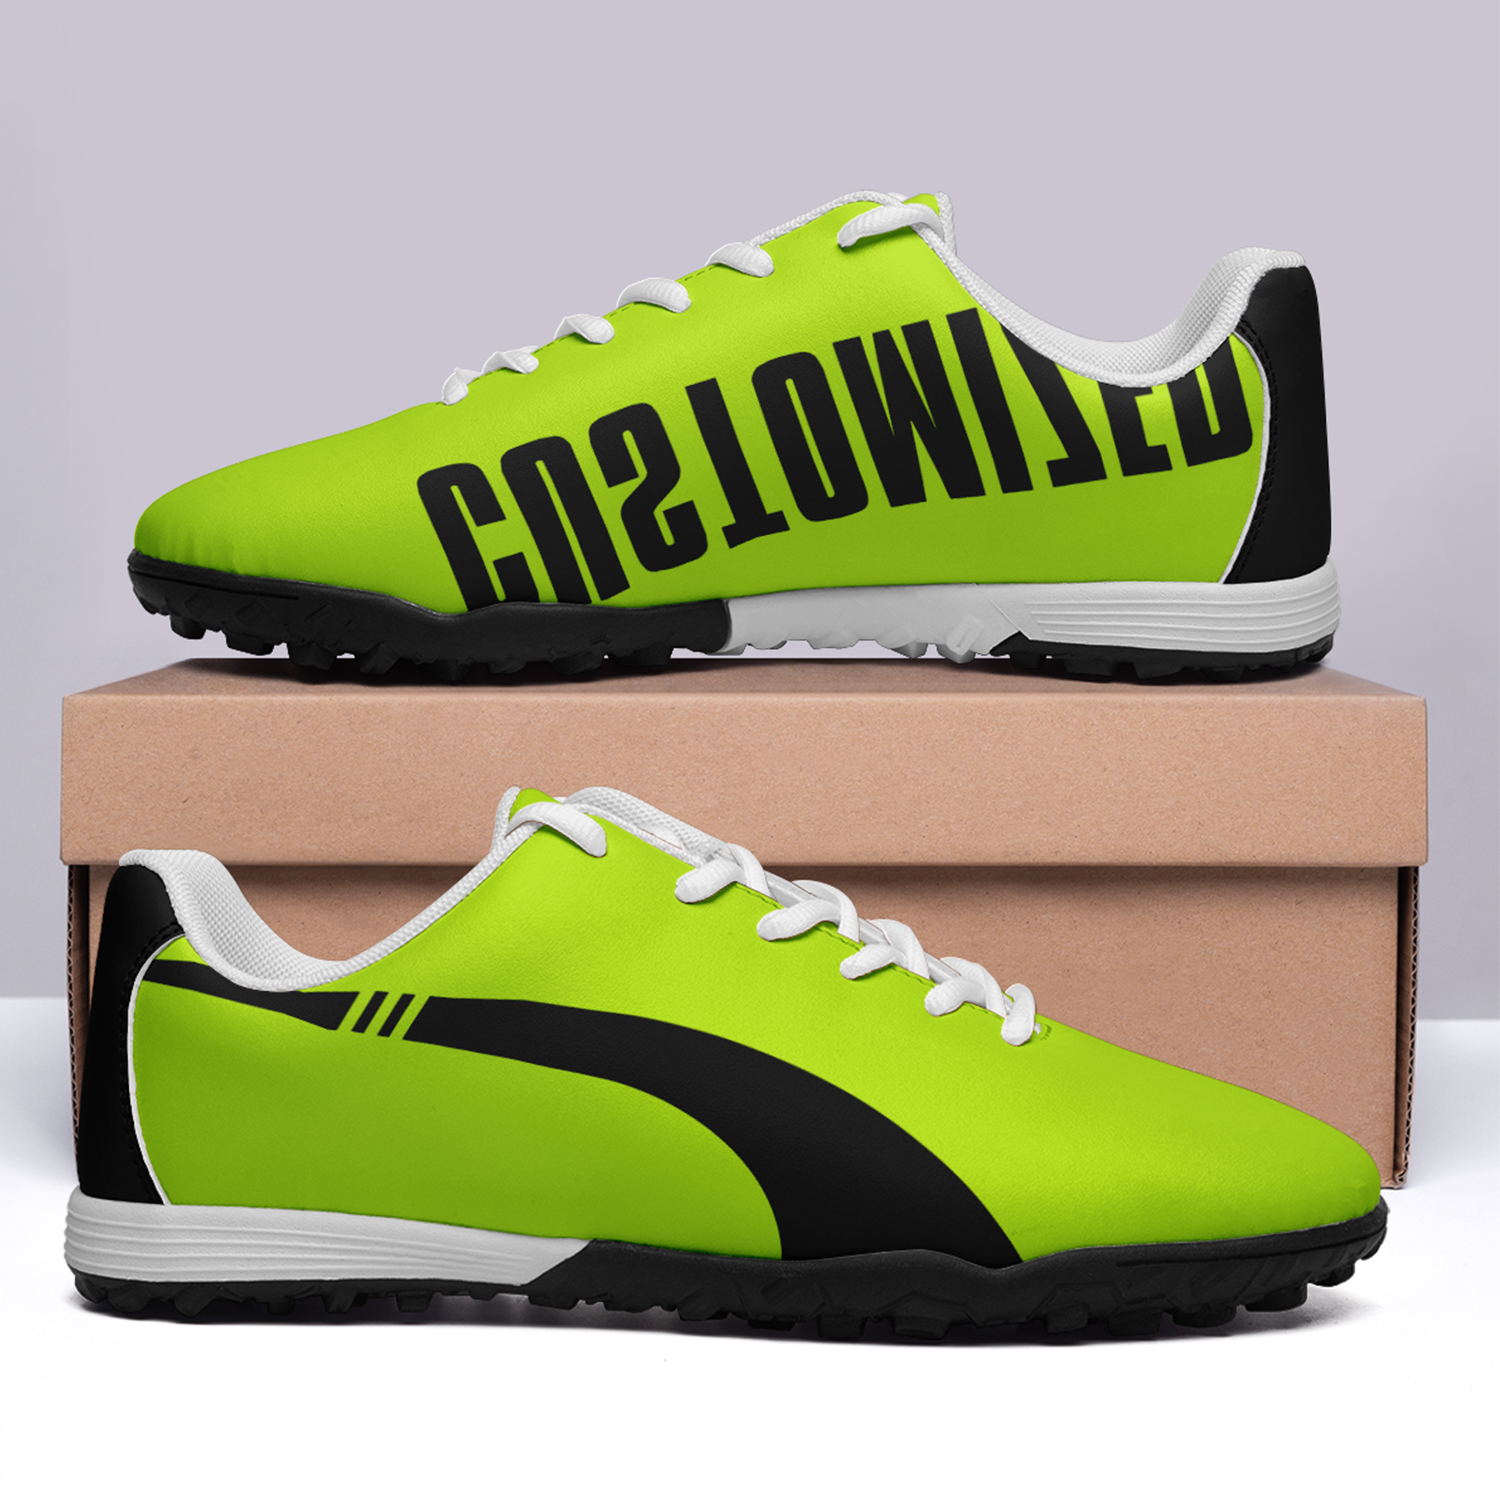 Custom Mexico Team Soccer Shoes Personalized Design Printing POD Football Shoes